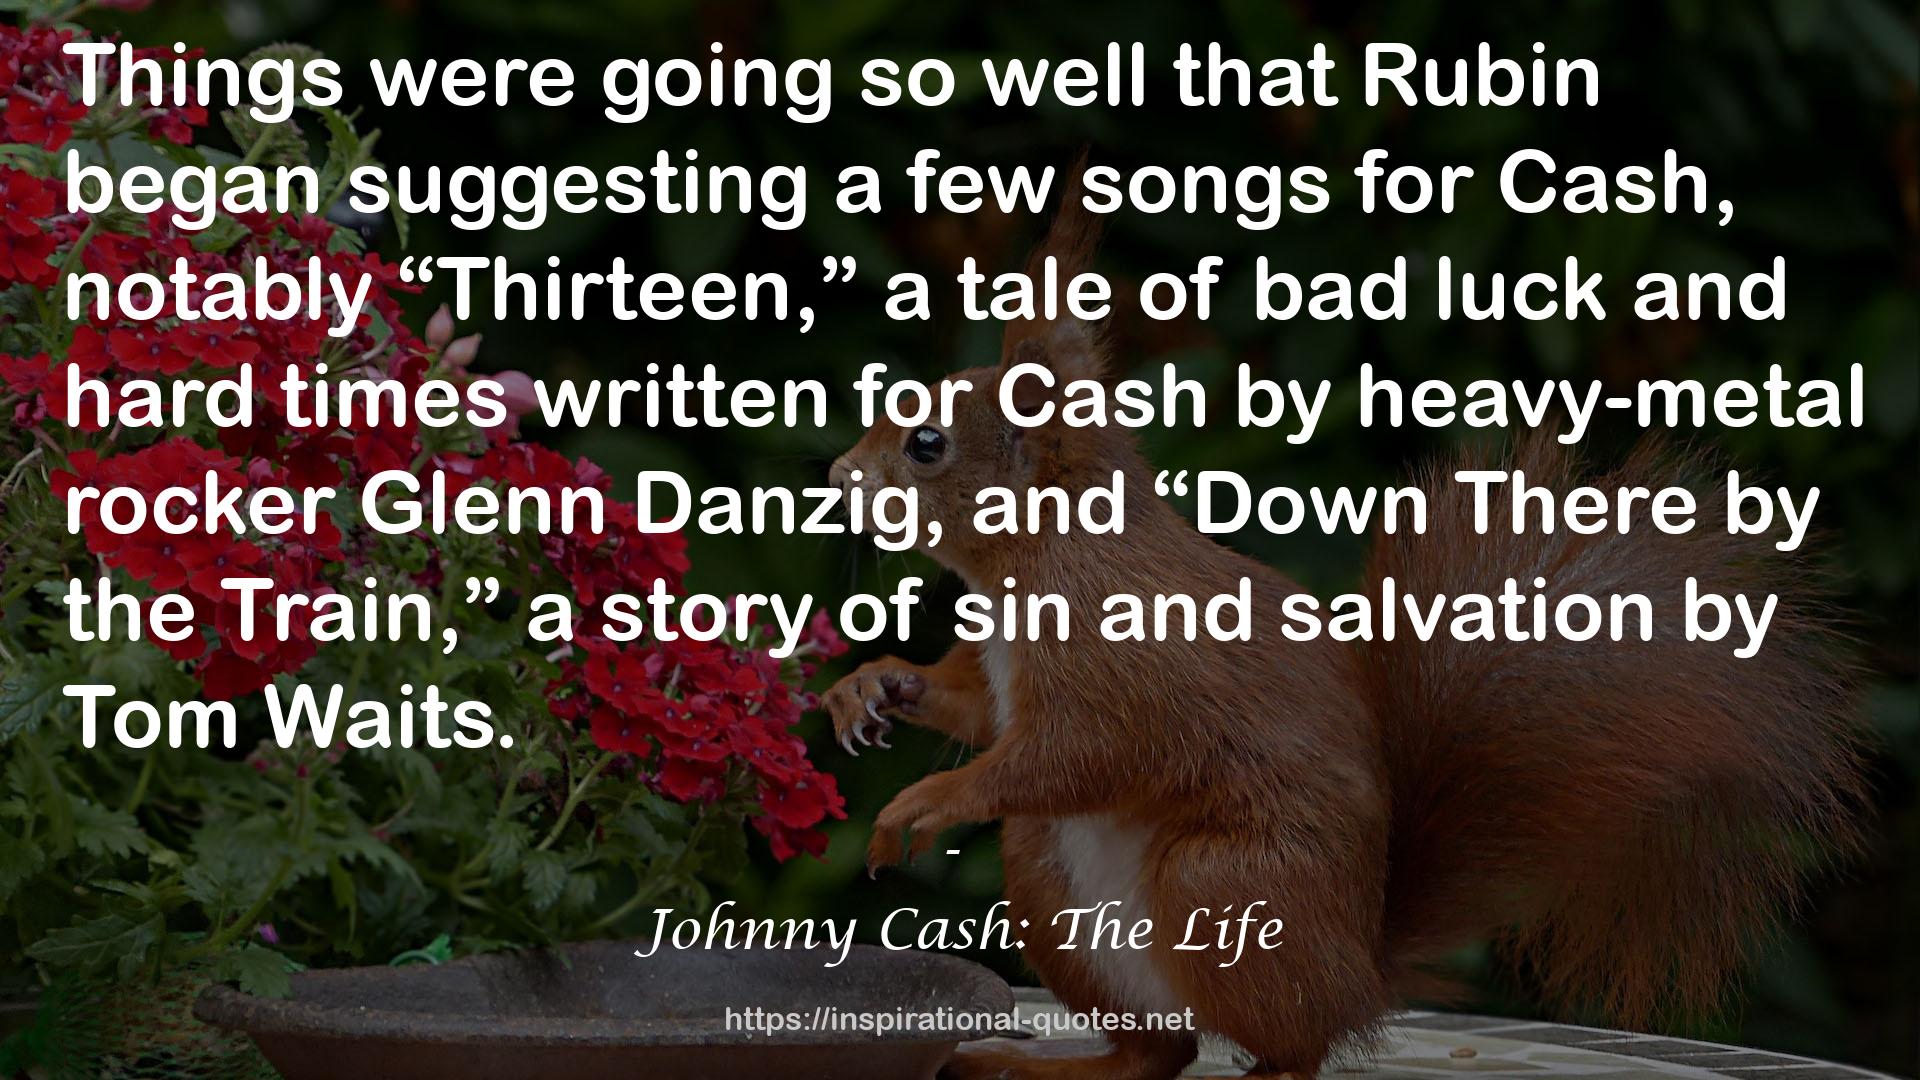 Johnny Cash: The Life QUOTES